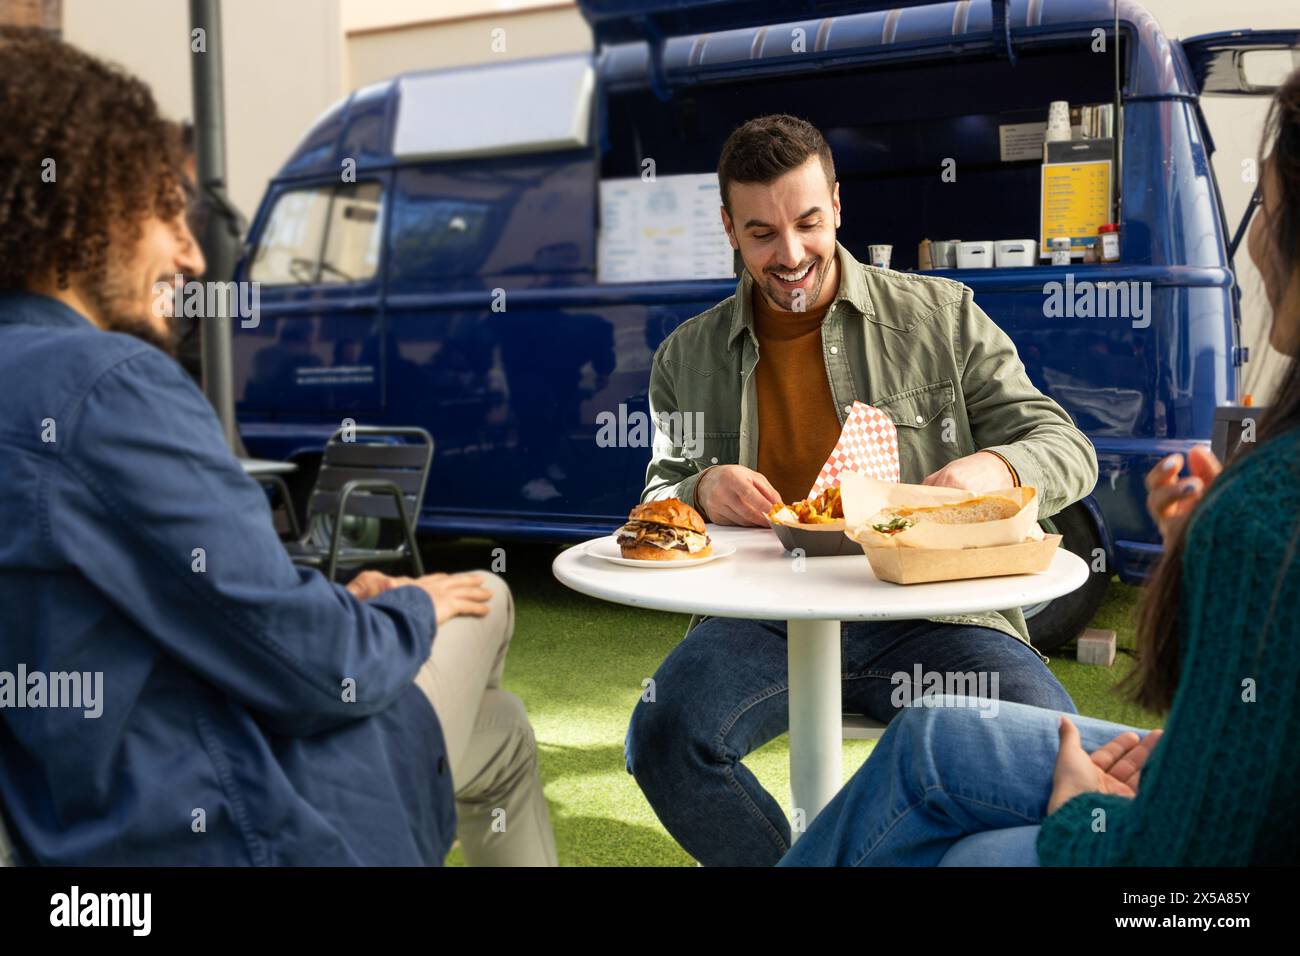 Friends share smiles and a casual meal outside a trendy blue food truck, showcasing an enjoyable urban eating experience Stock Photo